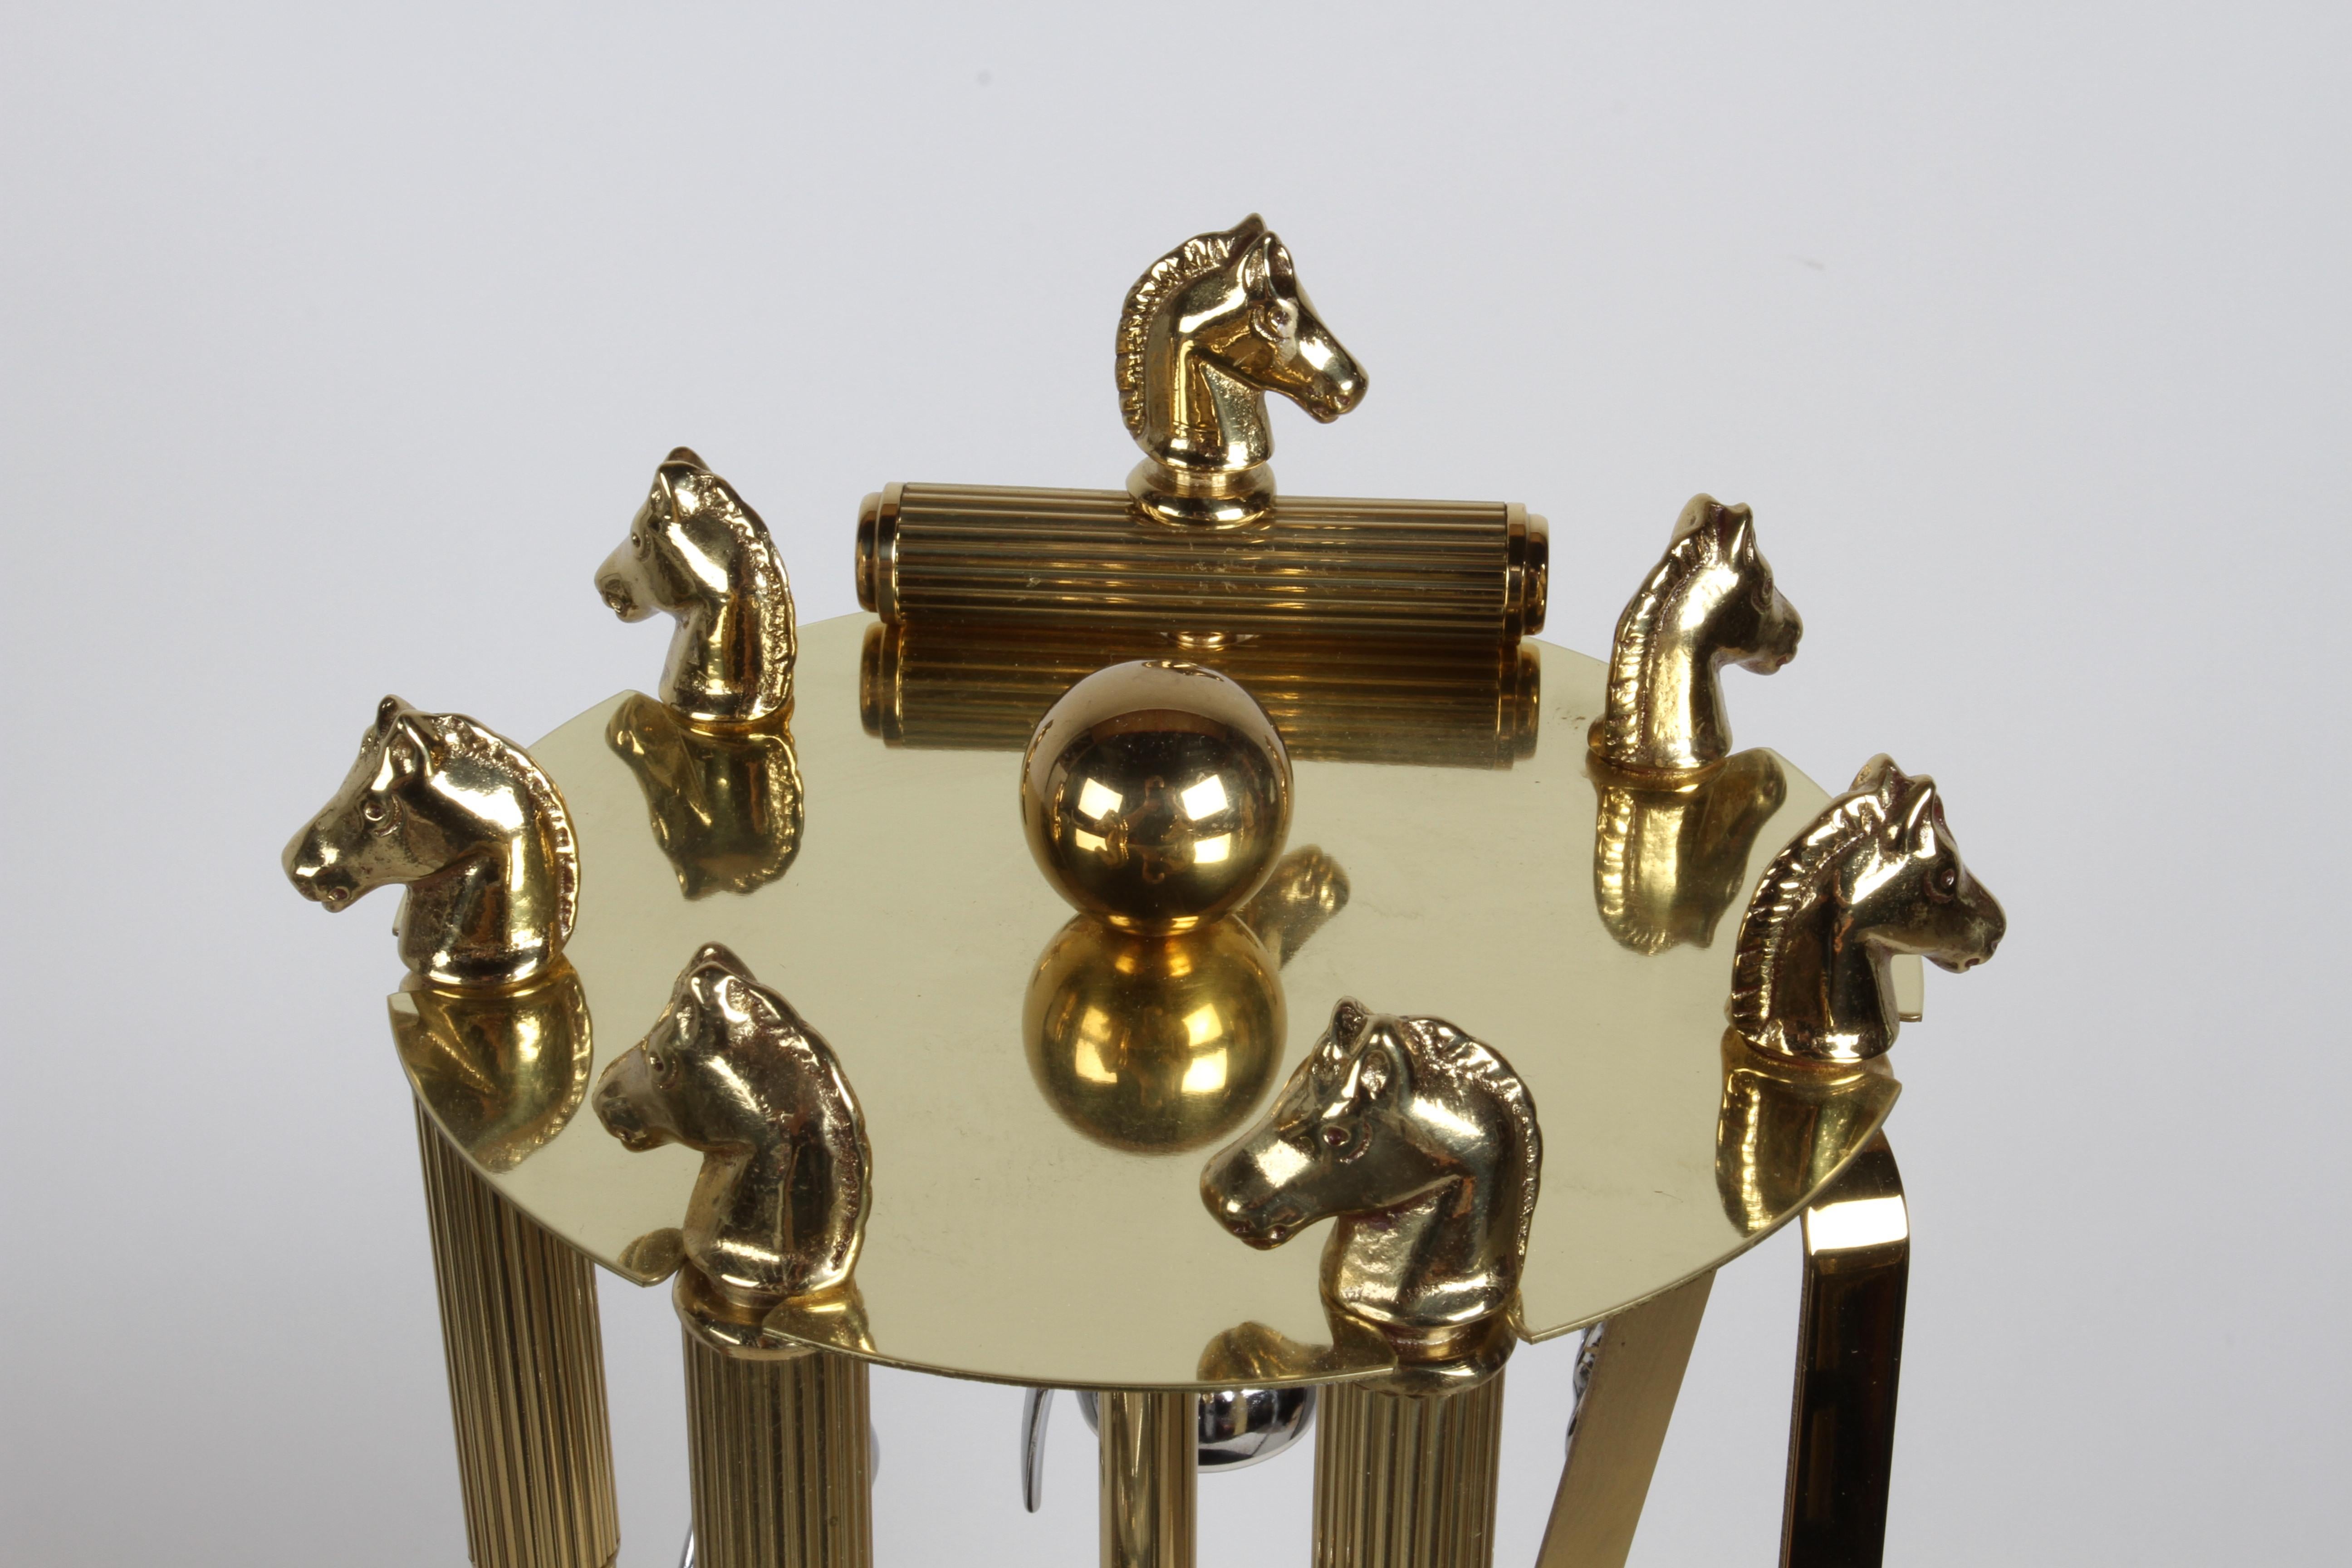 A Handsome, substantial and very well-made 7- piece Mid-Century equestrian theme , Regency brass horse head set of barware or bartender tools on a circular stand by Maxwell Phillip. This set includes hourglass-shaped measuring device, aka as a